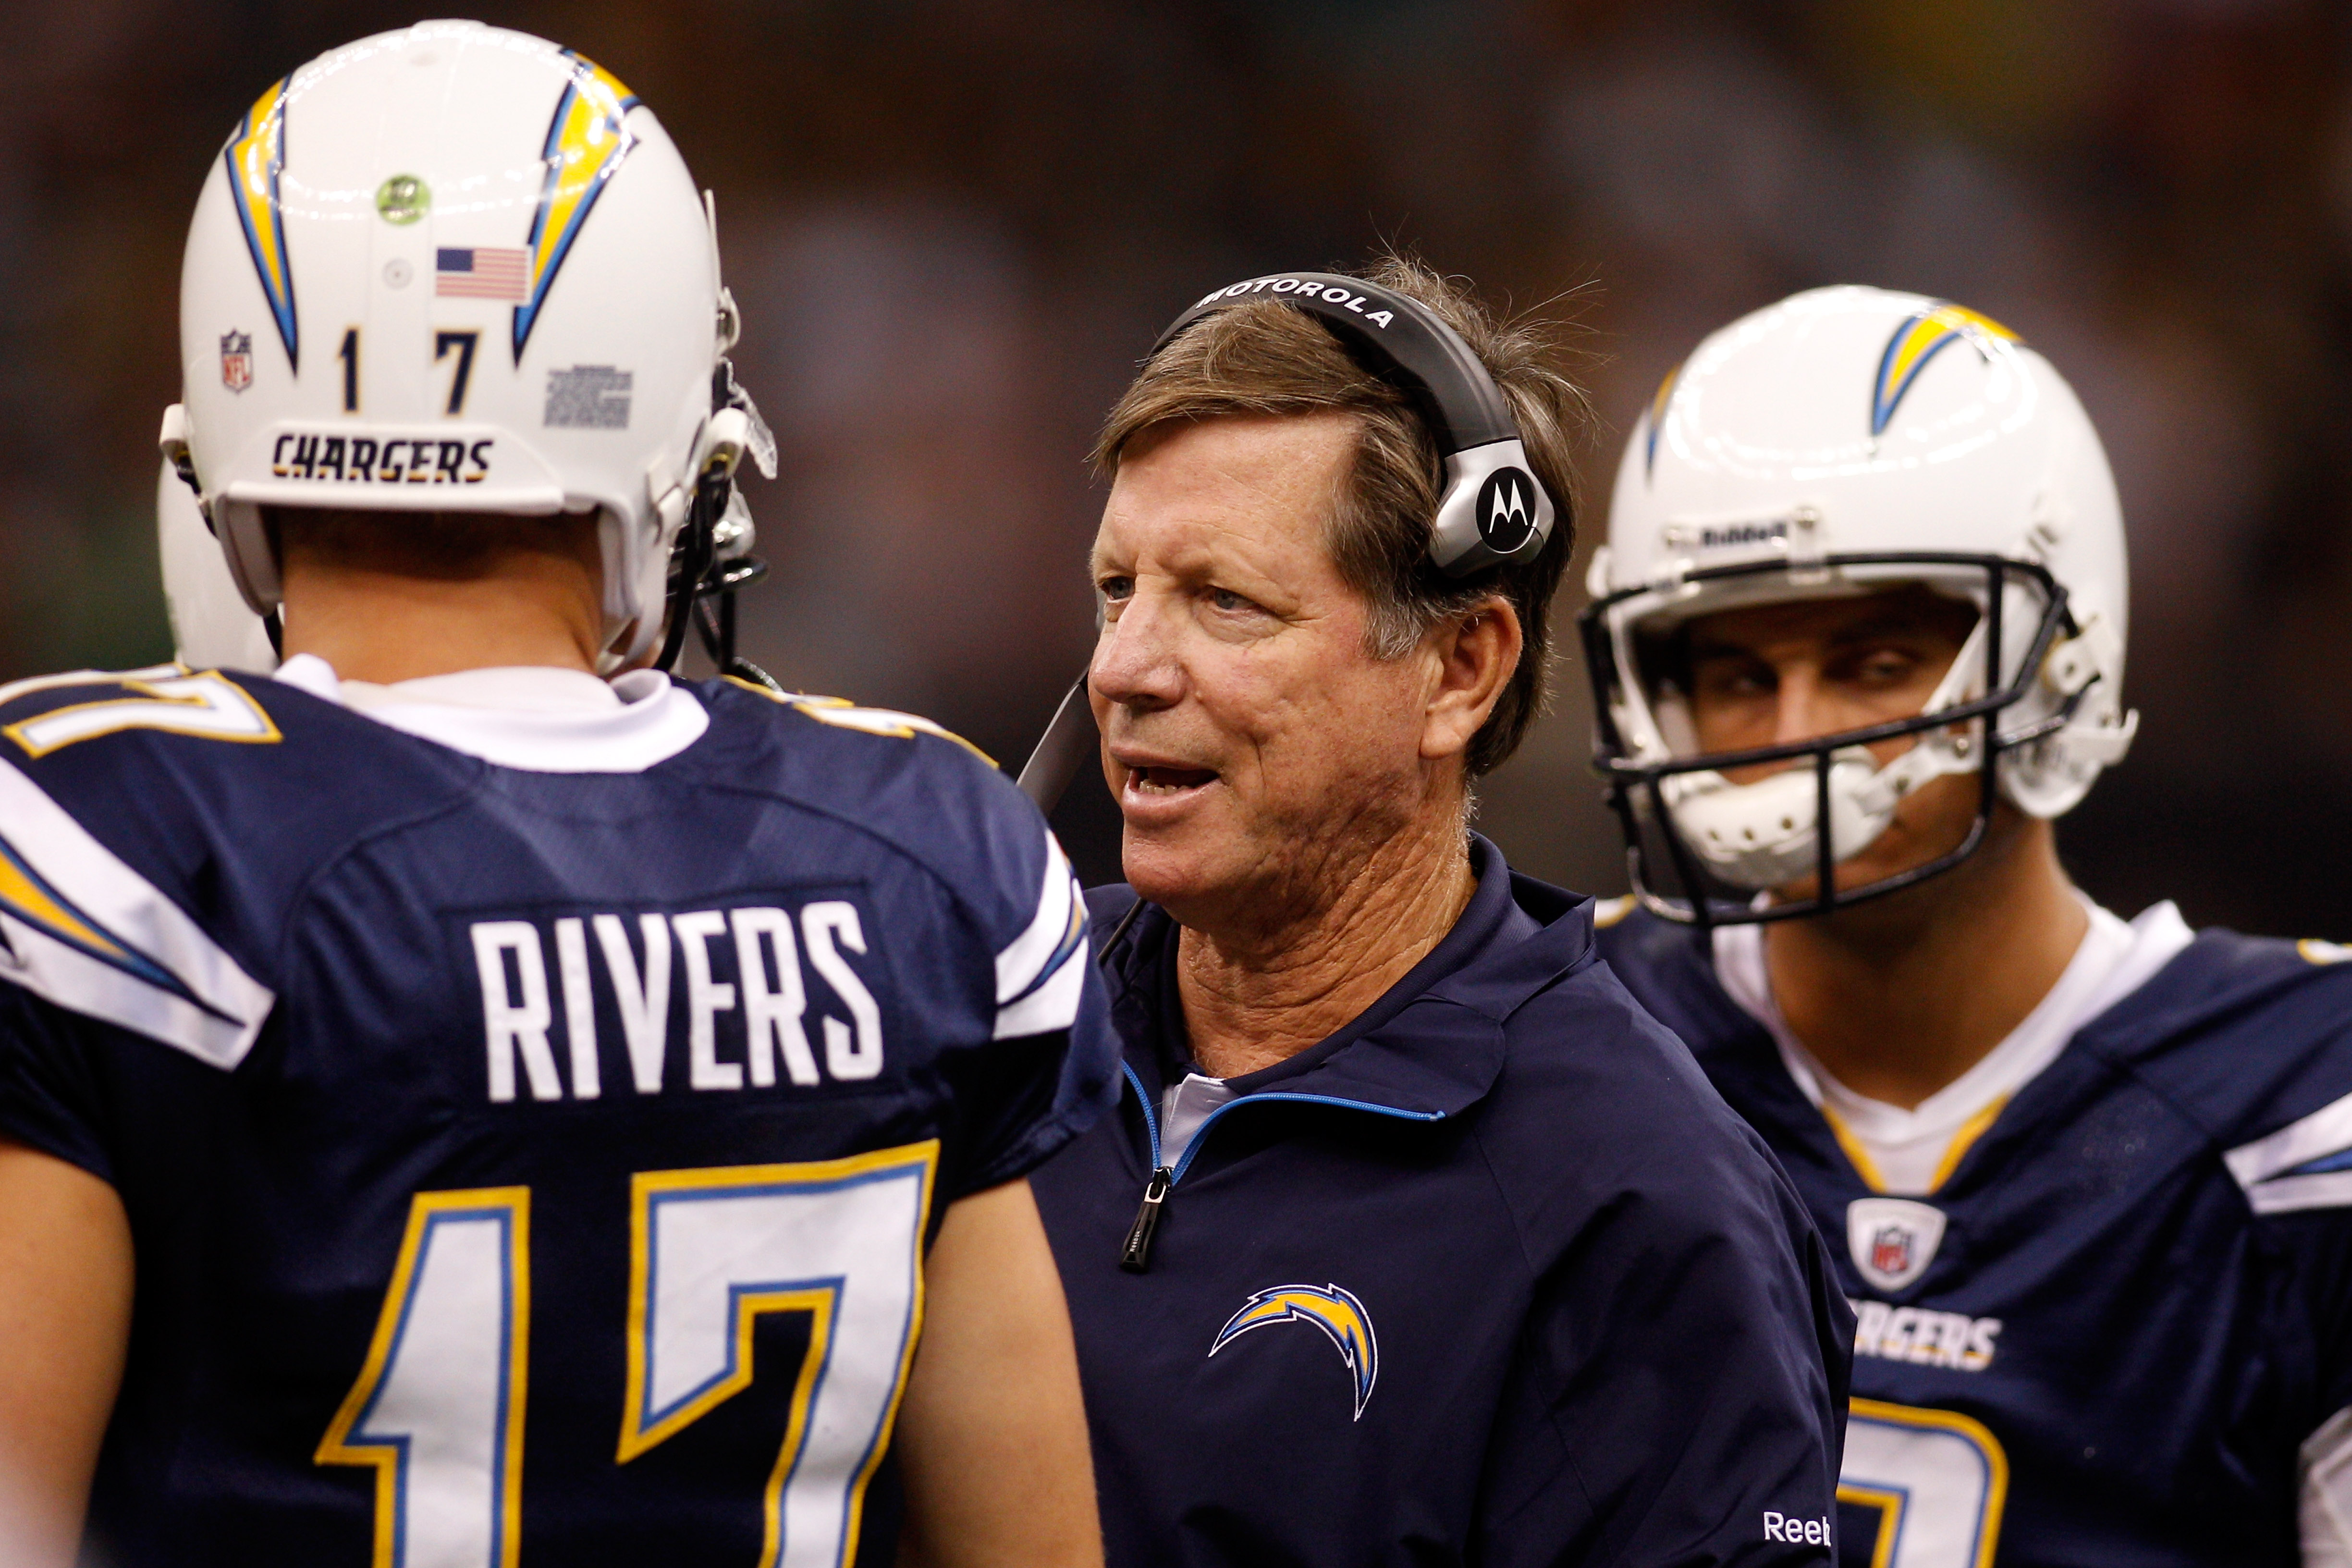 NEW ORLEANS - AUGUST 27:  Head coach Norv Turner talks with Philip Rivers #17 of the San Diego Chargers during the game against the New Orleans Saints at the Louisiana Superdome on August 27, 2010 in New Orleans, Louisiana.  (Photo by Chris Graythen/Getty